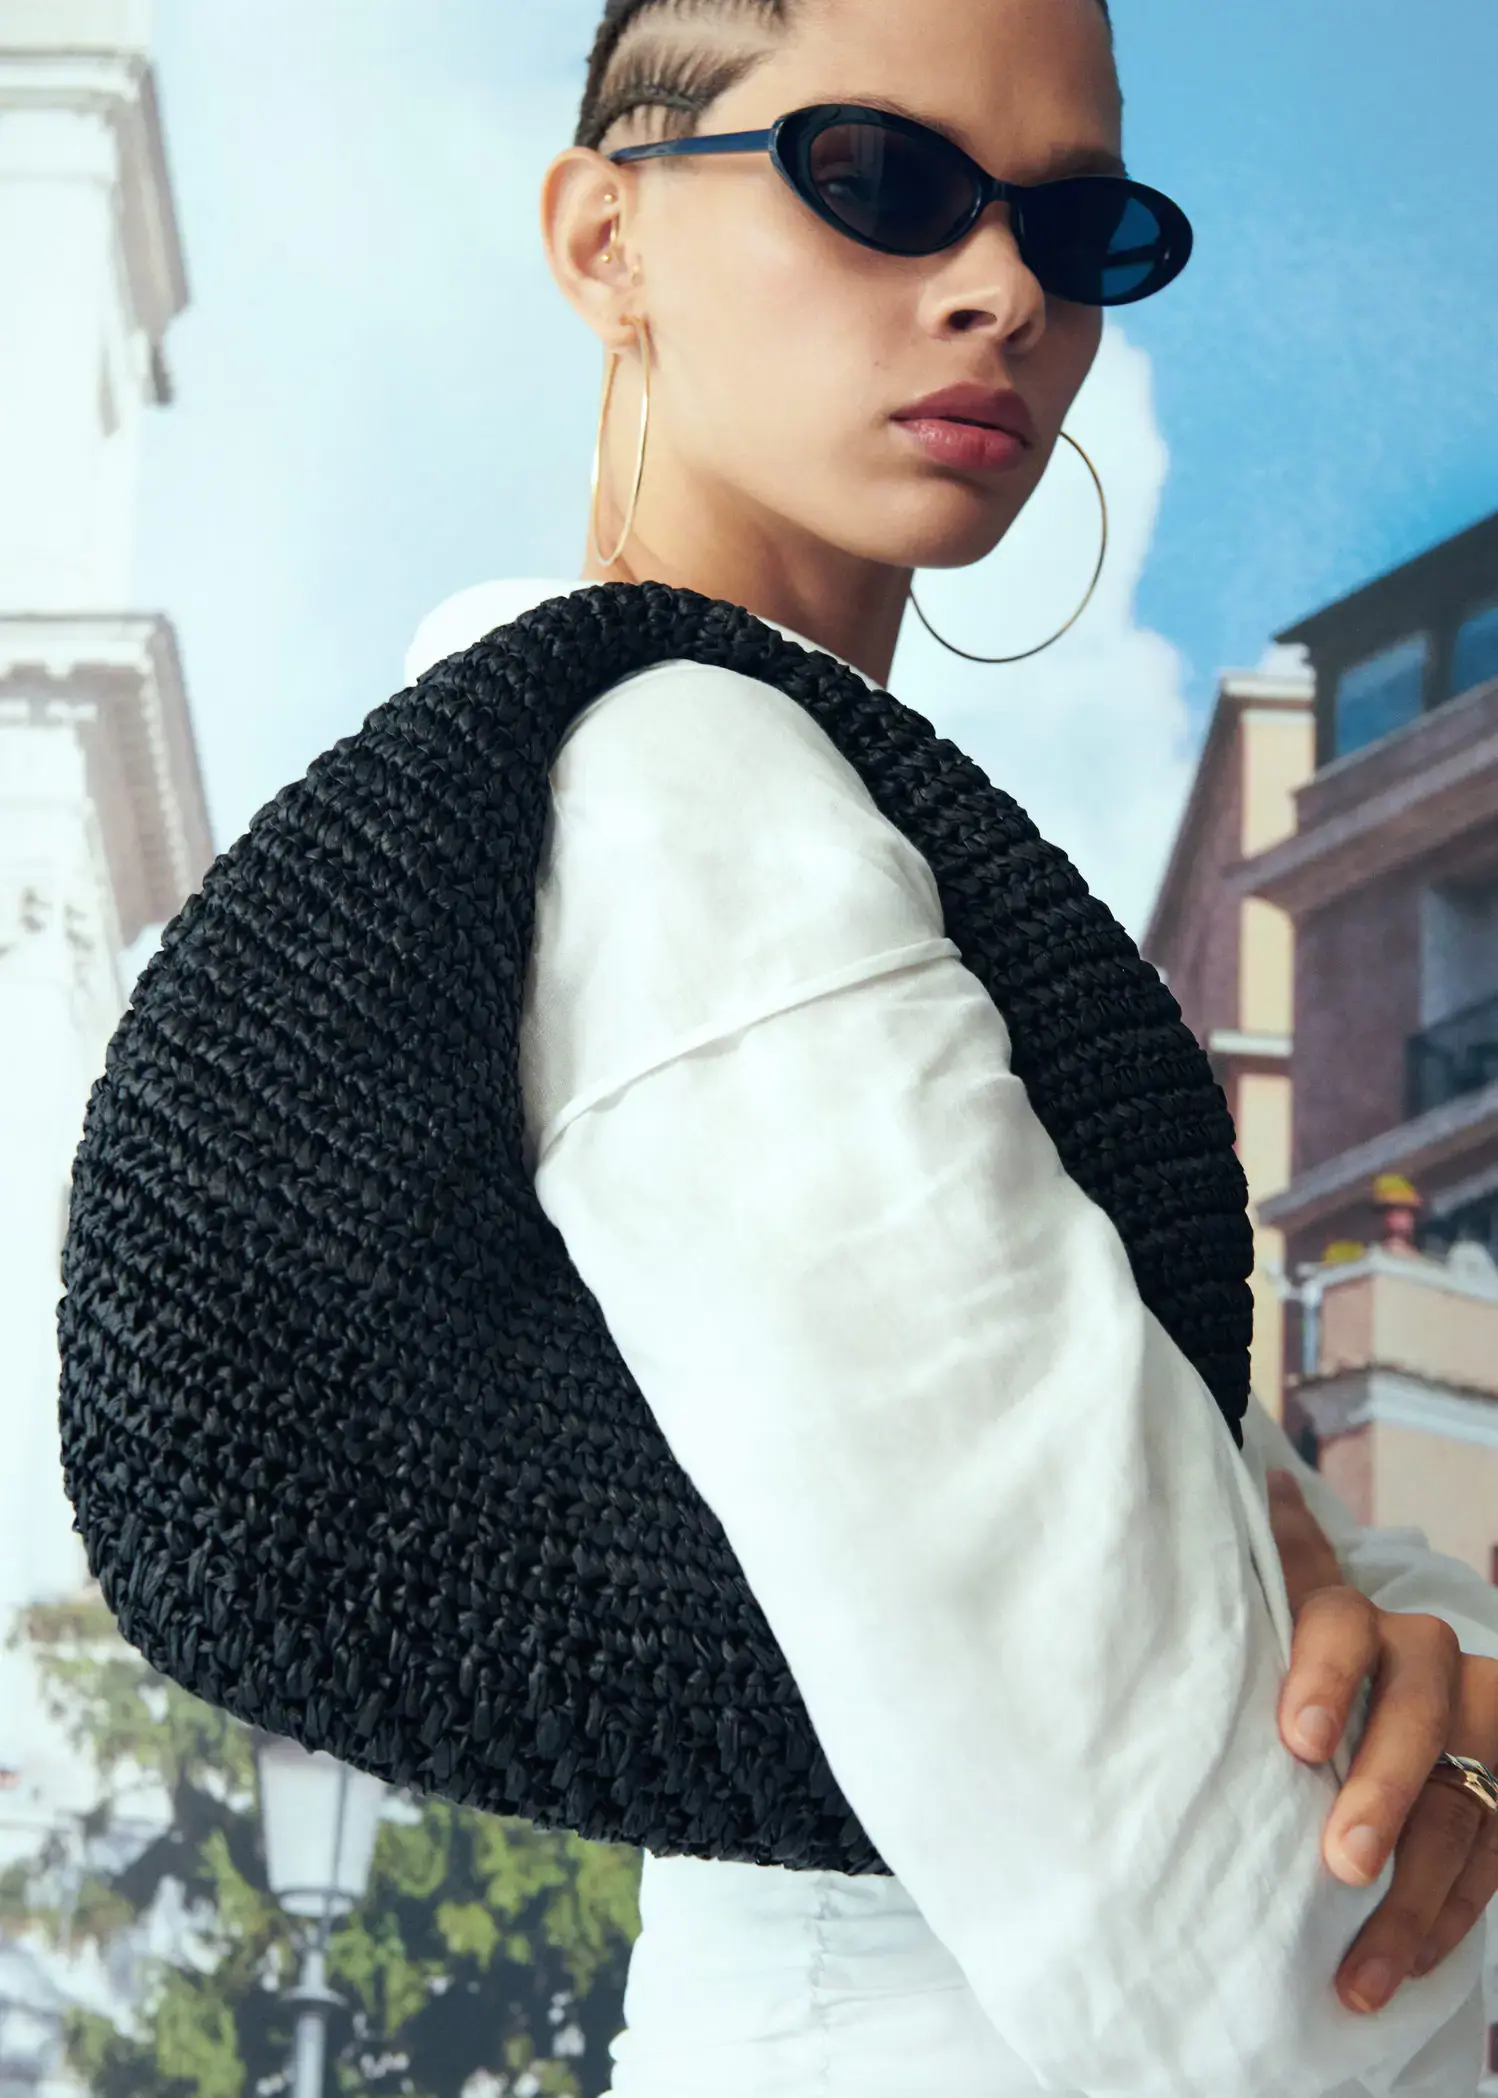 Mango Round natural fiber bag. a close up of a person wearing a black and white outfit 